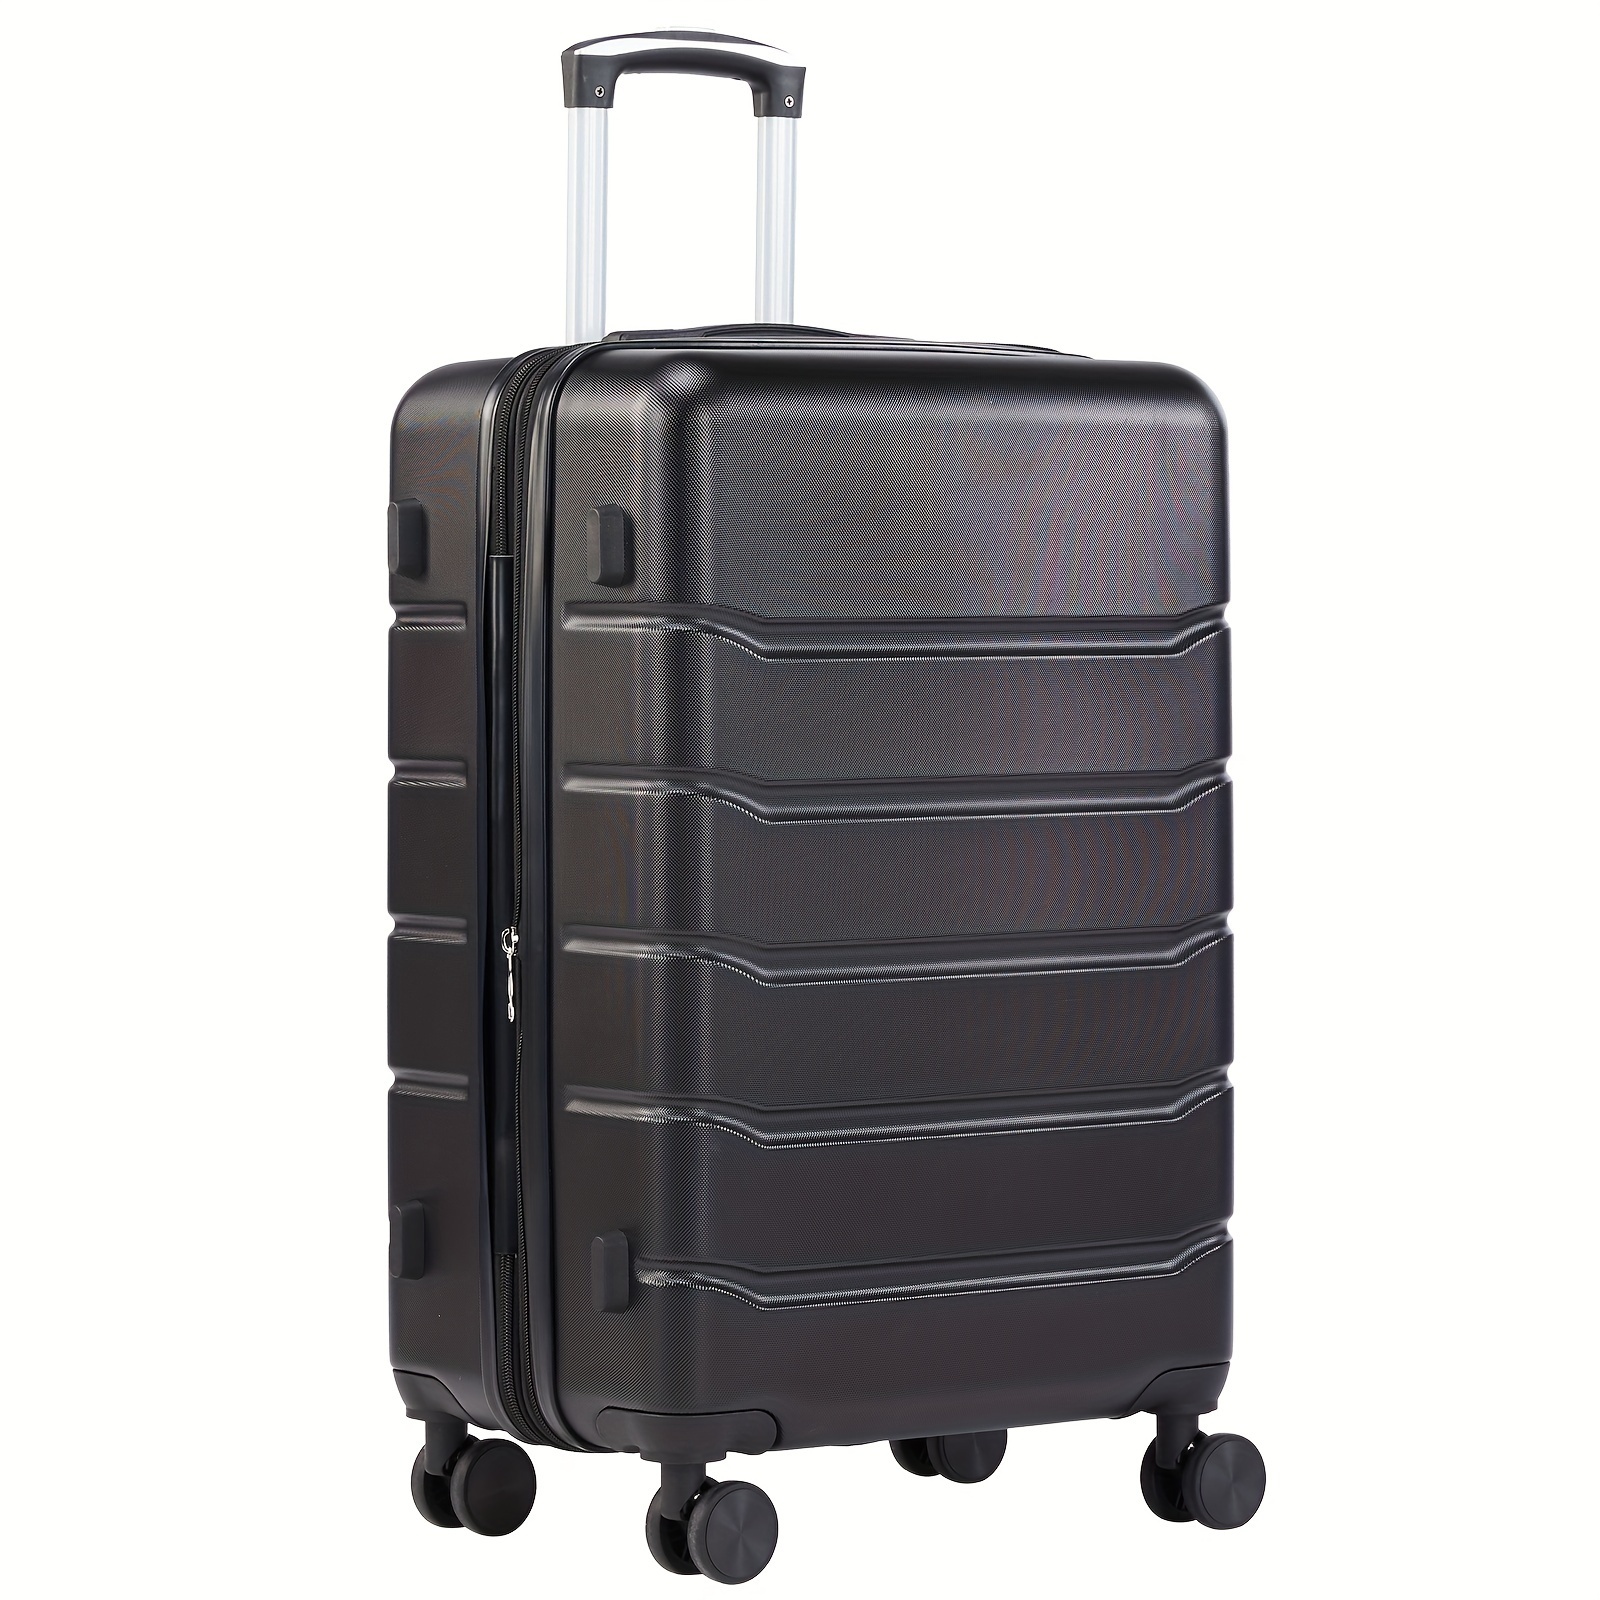 

Expandable Luggage, Multi-functional Interior, 3 Level Telescoping Handles, Tsa Combination Lock, Travel With Ease